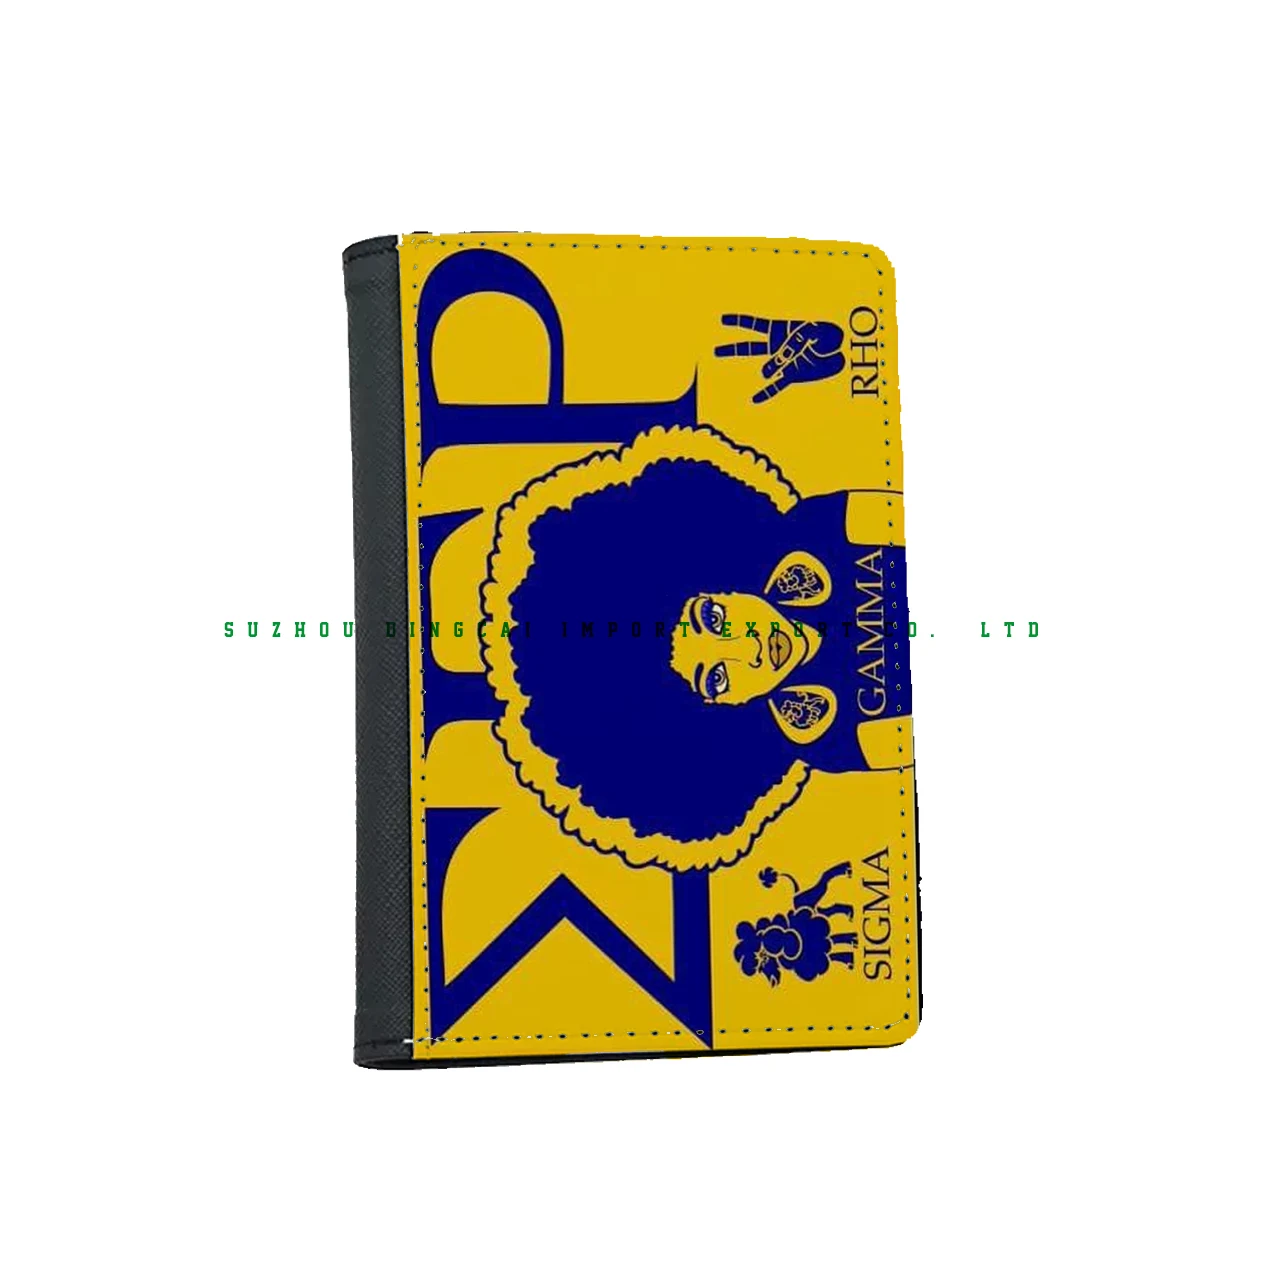 Huidige Mellow Raad Top Quality Sorority 14.6x9cm Passport Cover Pu Leather Sigma Gamma Rho  Passport Holder Cover Case With Card Slot - Buy Sigma Gamma Rho Passport  Holder,Sigma Gamma Rho Passport Cover,Sublimation Cover Case Product